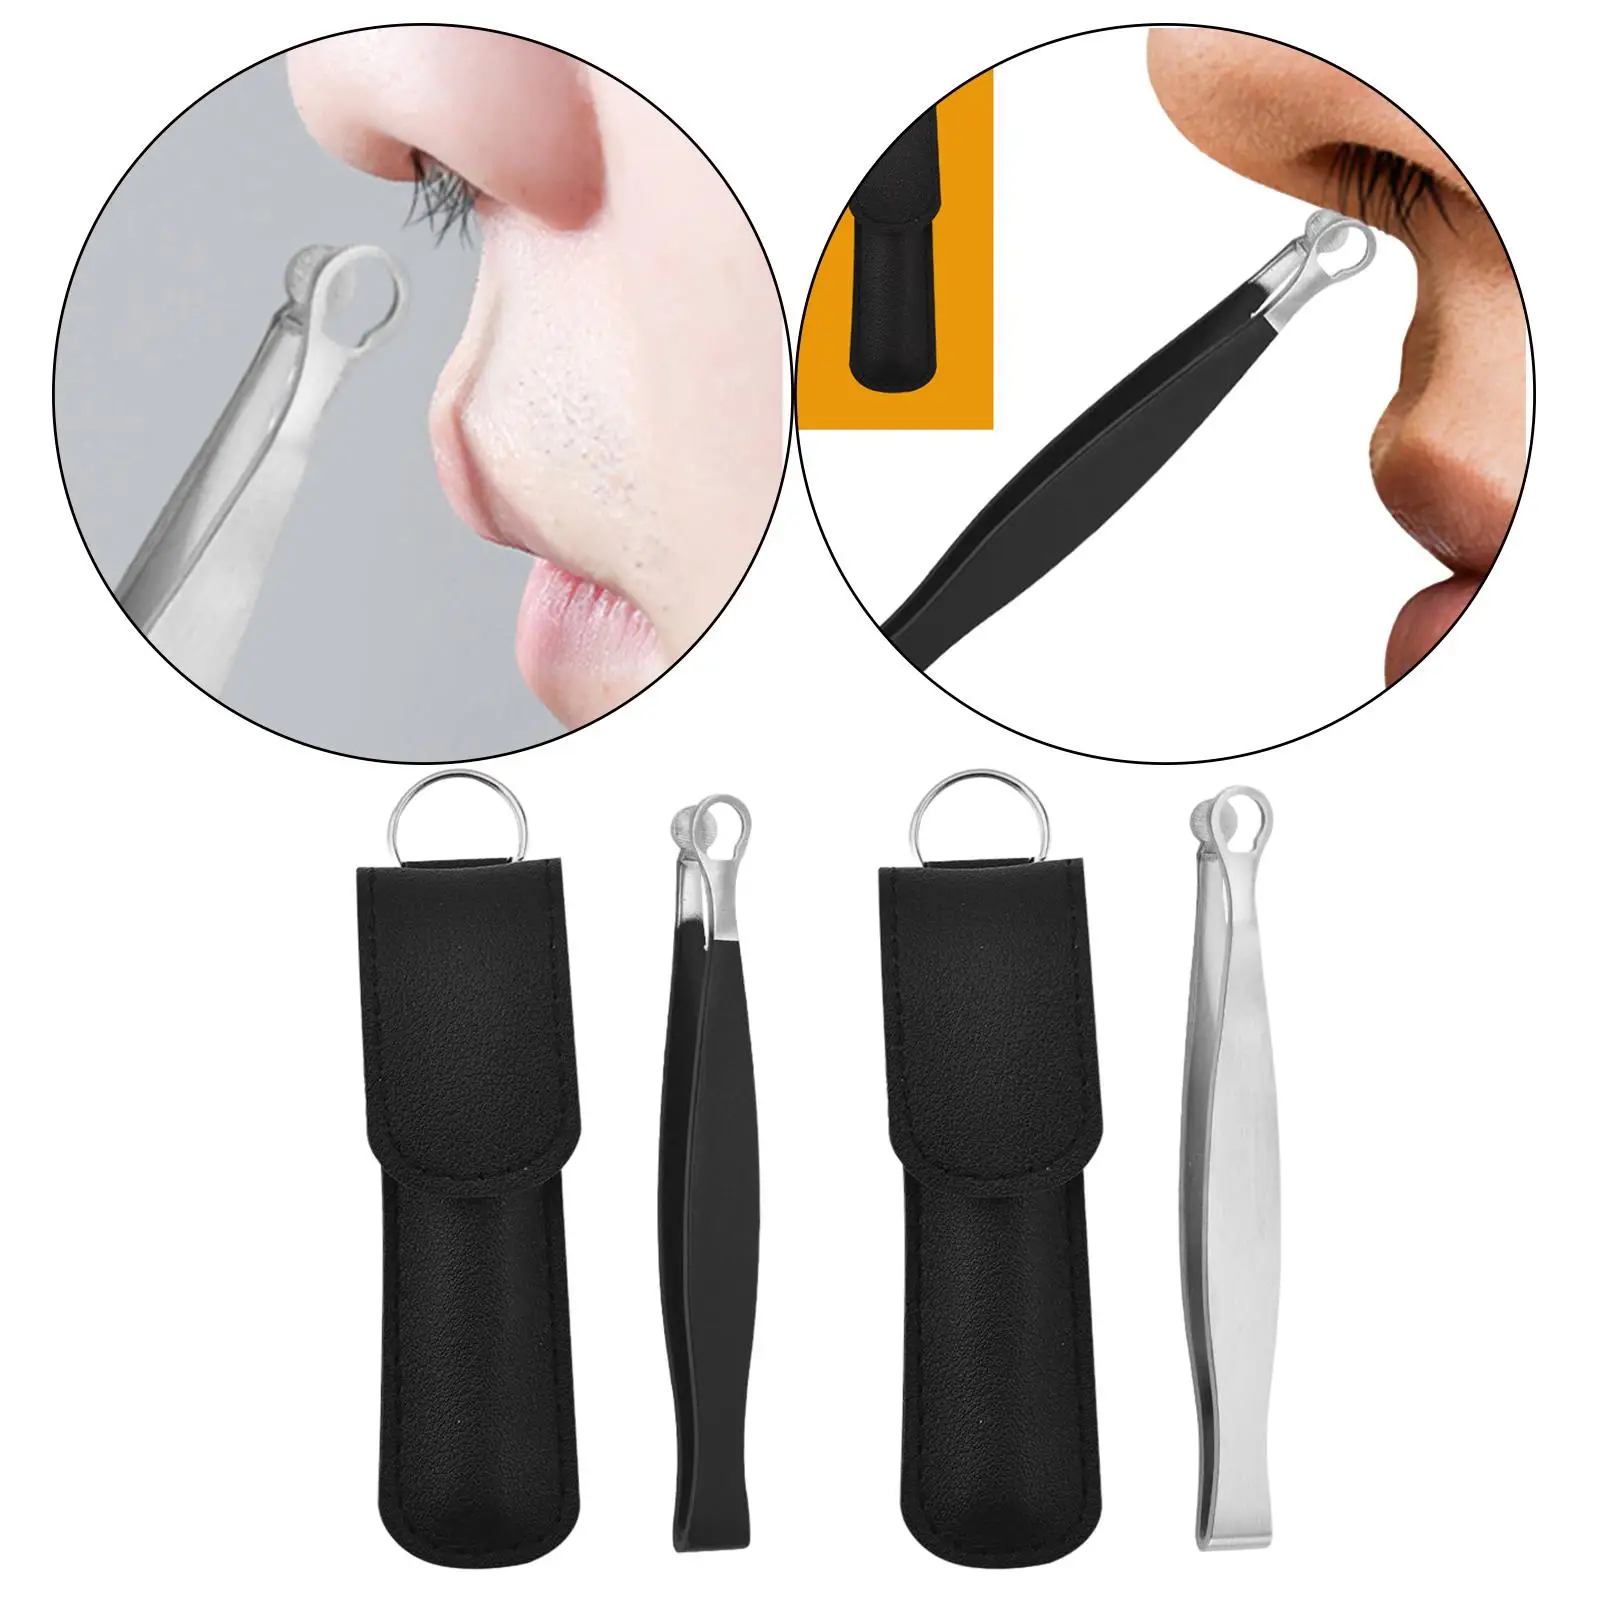 Nose Hair Trimming Tweezers Round Tip Water Resistant Portable Pocket Size Eyebrow Clippers for Nose Cleaning Dating Women Men